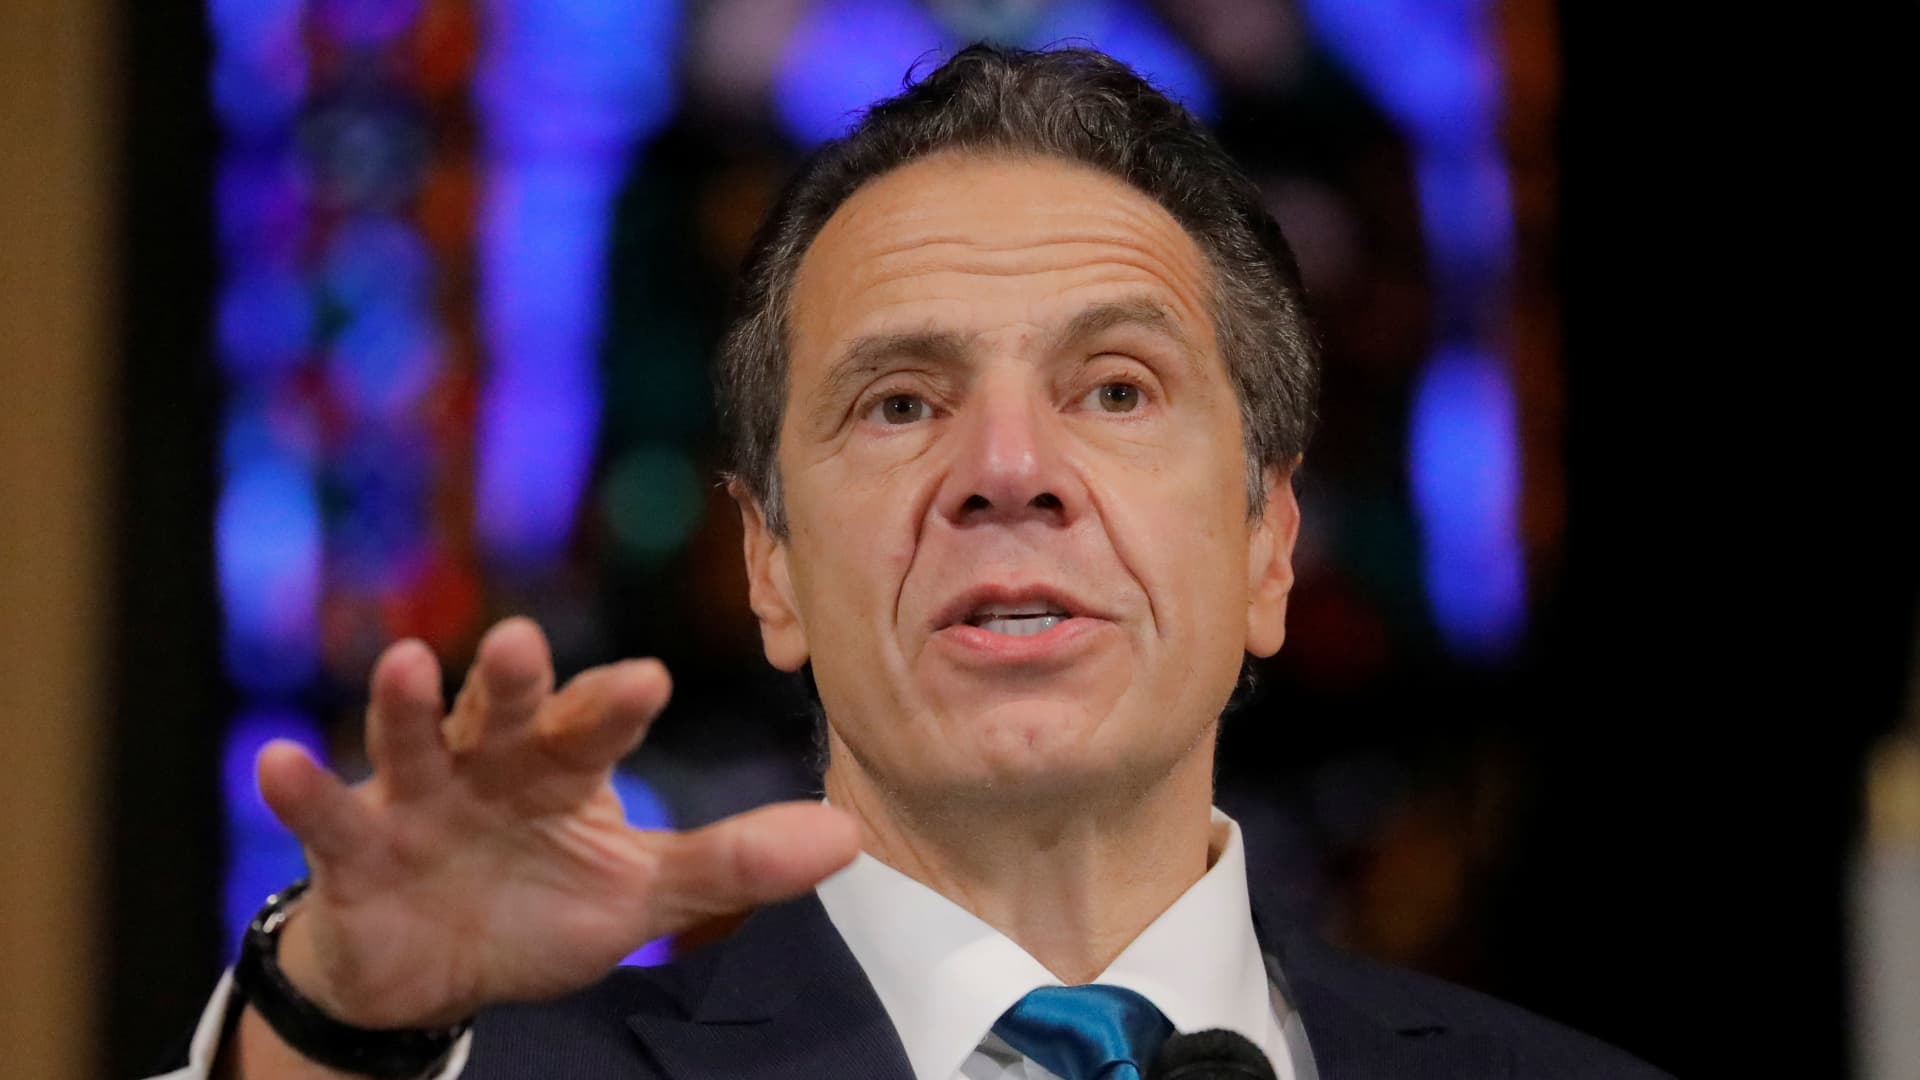 New York Governor Andrew Cuomo delivers remarks on the coronavirus disease (COVID-19) at the Riverside Church in Manhattan, New York City, U.S., November 15, 2020.